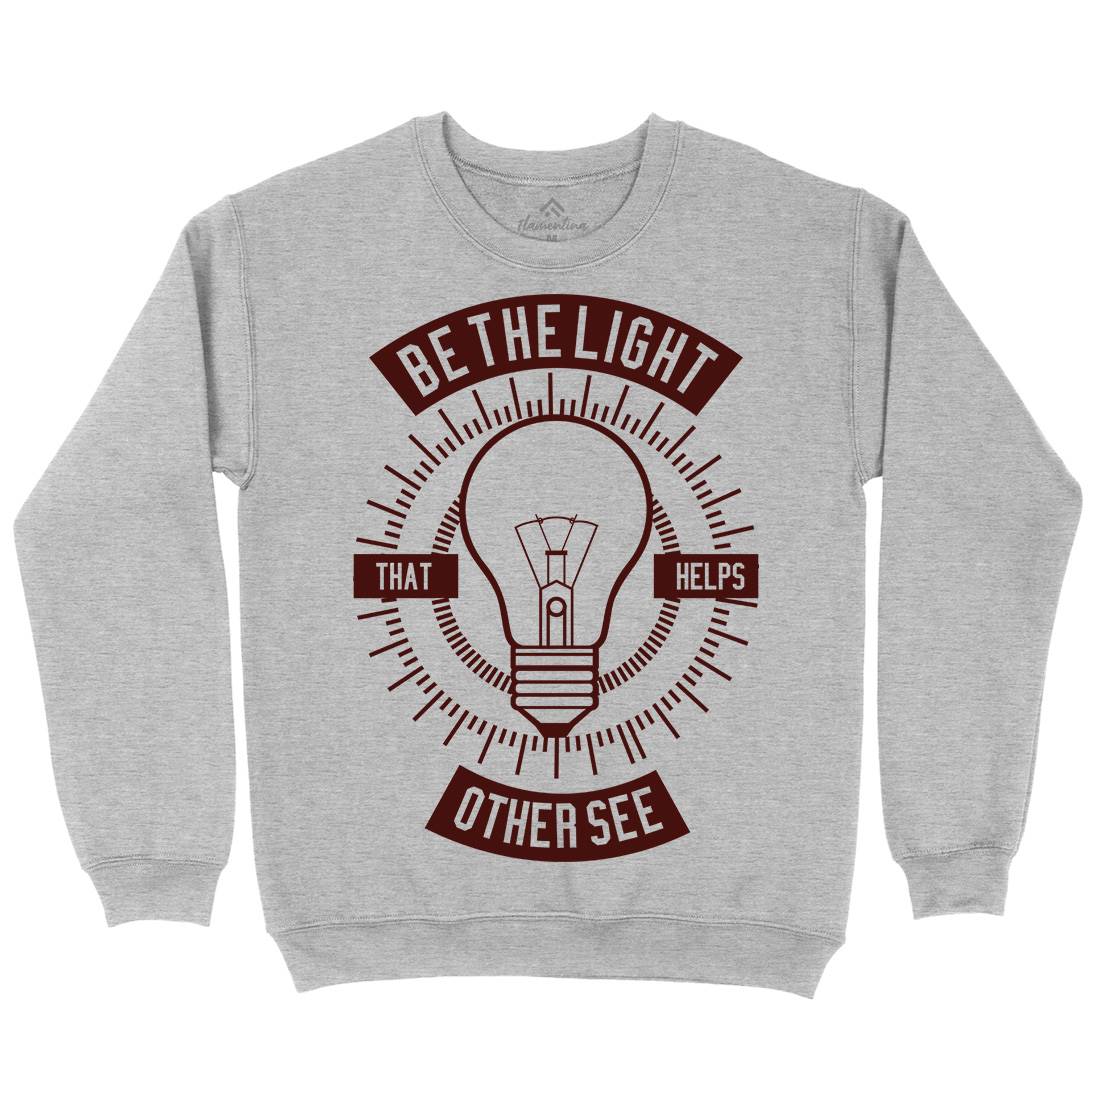 Be The Light Kids Crew Neck Sweatshirt Quotes A206